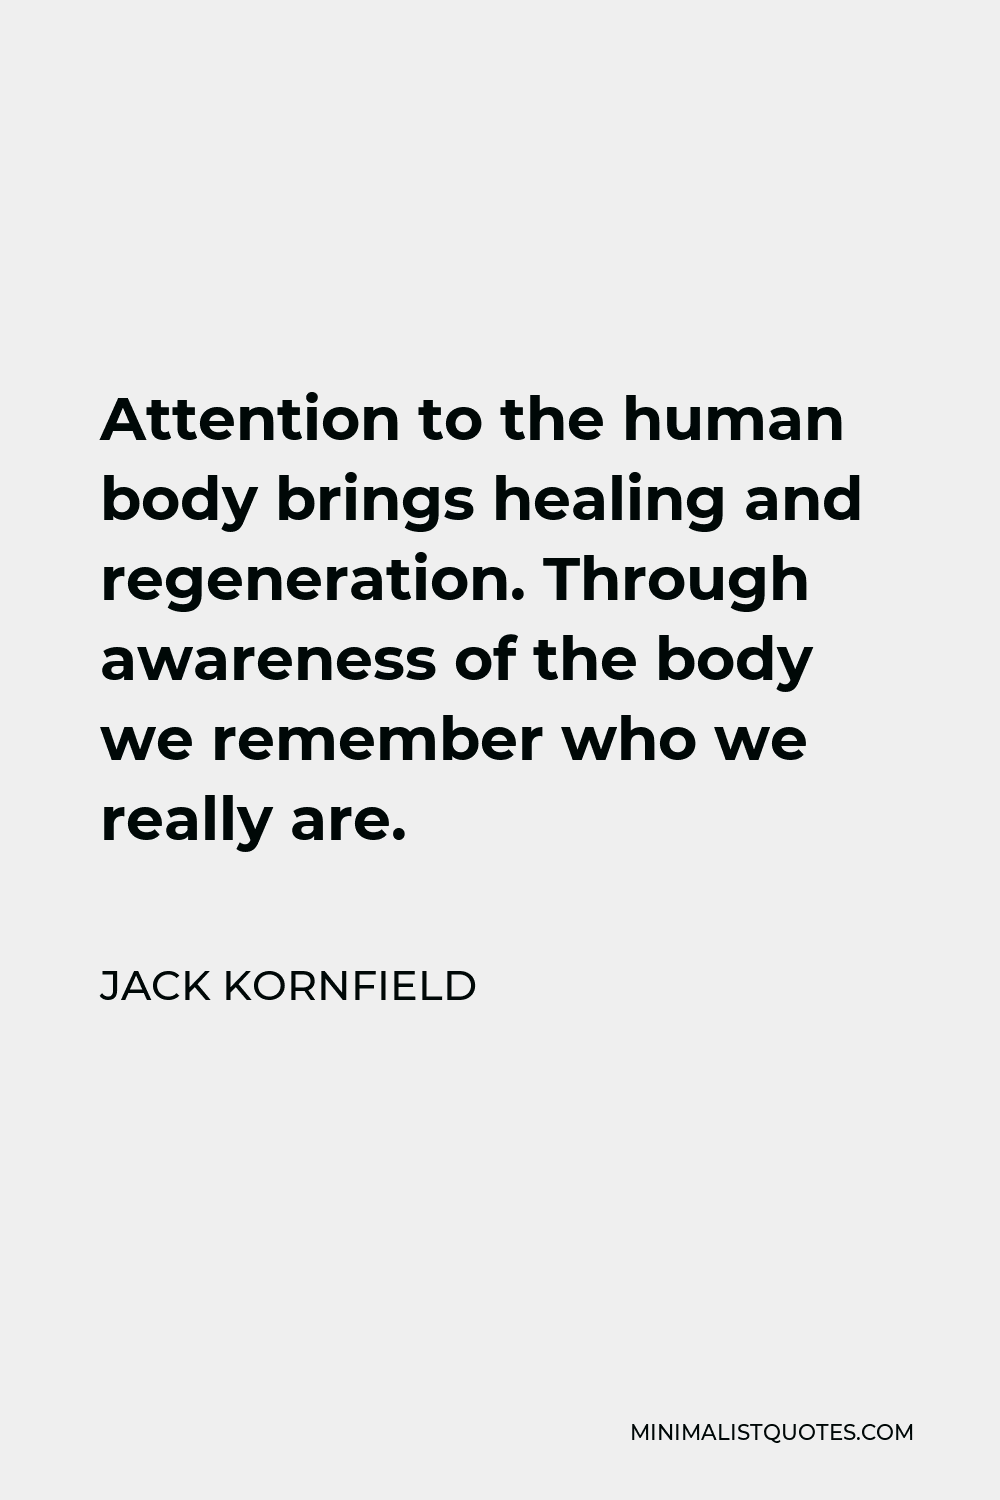 Jack Kornfield Quote - Attention to the human body brings healing and regeneration. Through awareness of the body we remember who we really are.